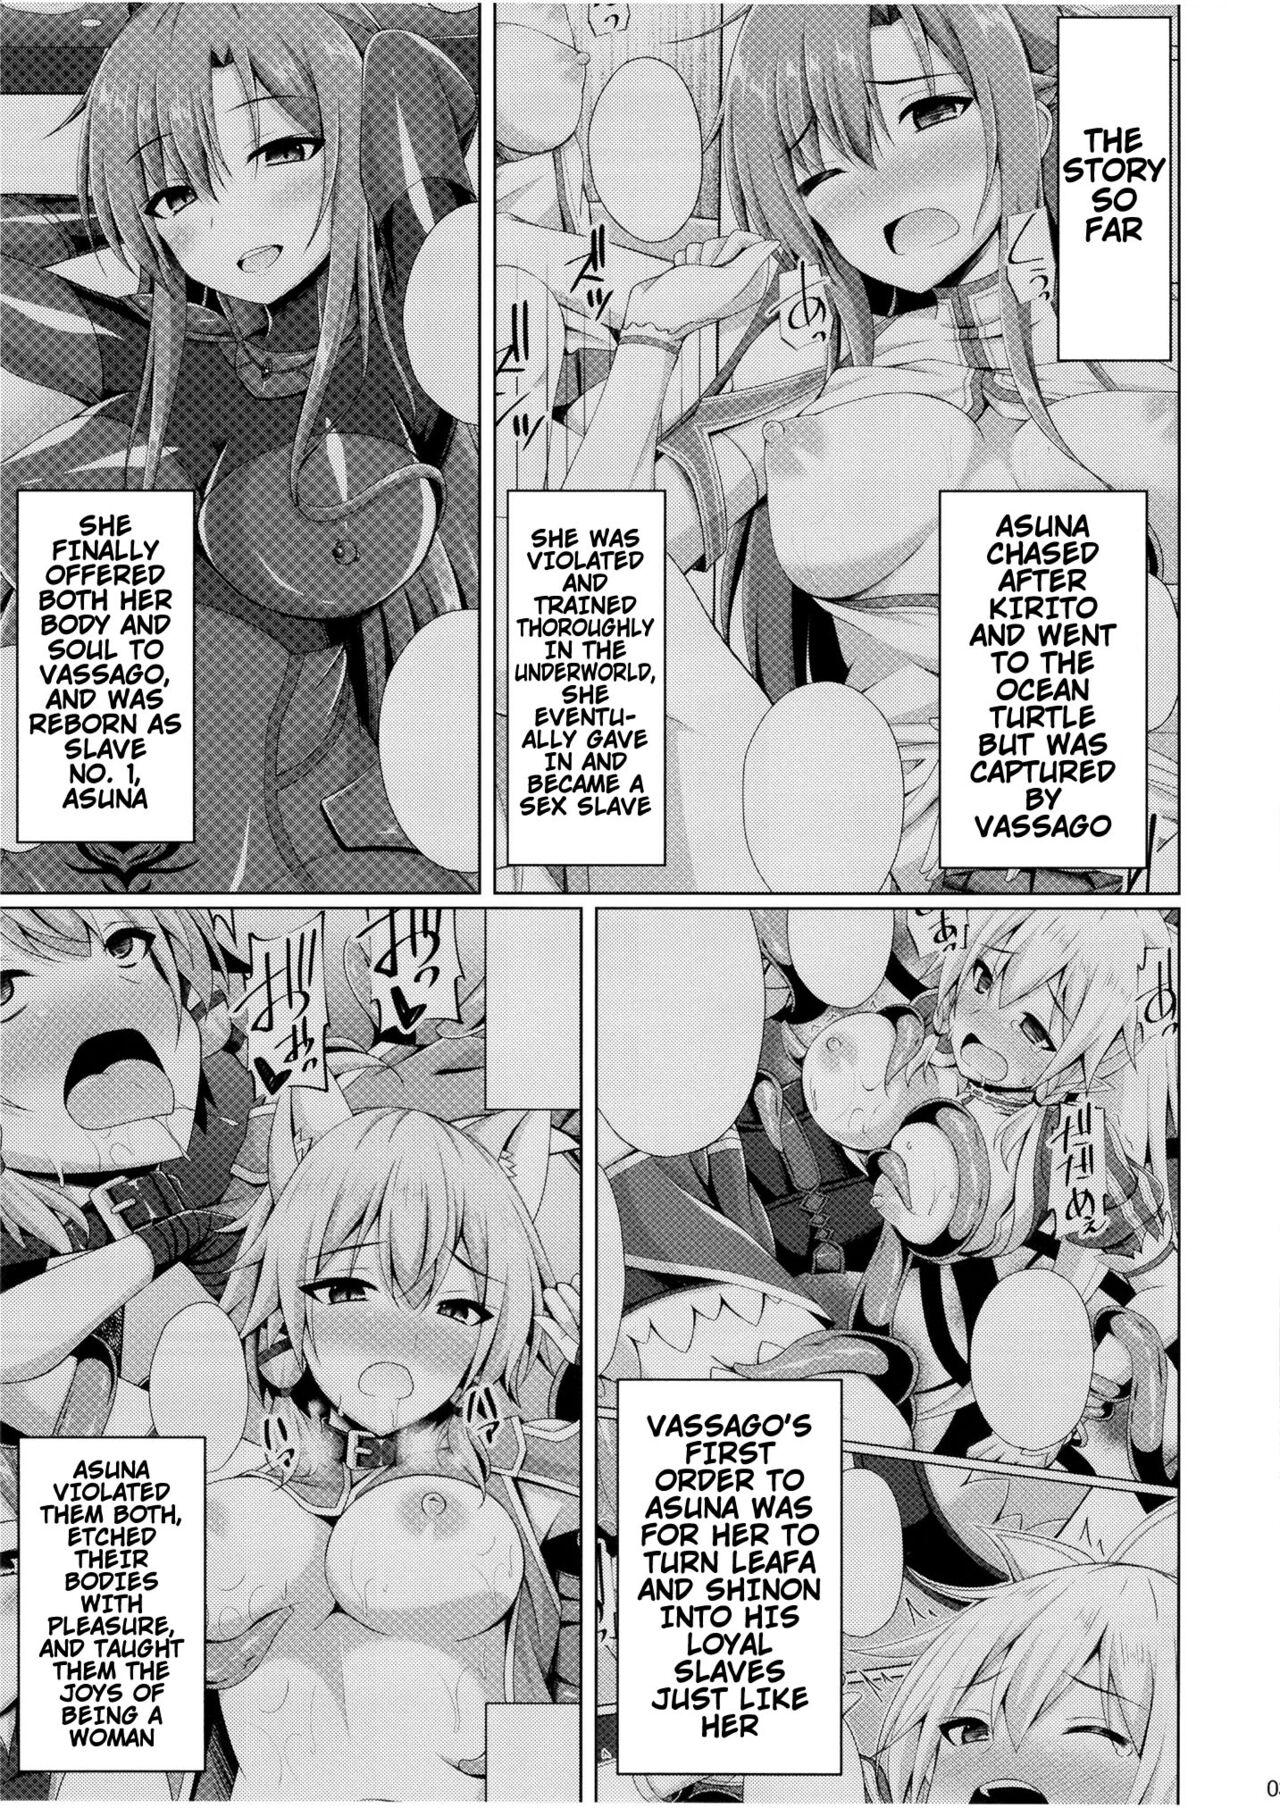 Tittyfuck Kuro no Kenshito Yobareta Ore wa mou nai... | There's Nothing Left Of Me From When I Was The Black Knight - Sword art online Nice Tits - Page 2